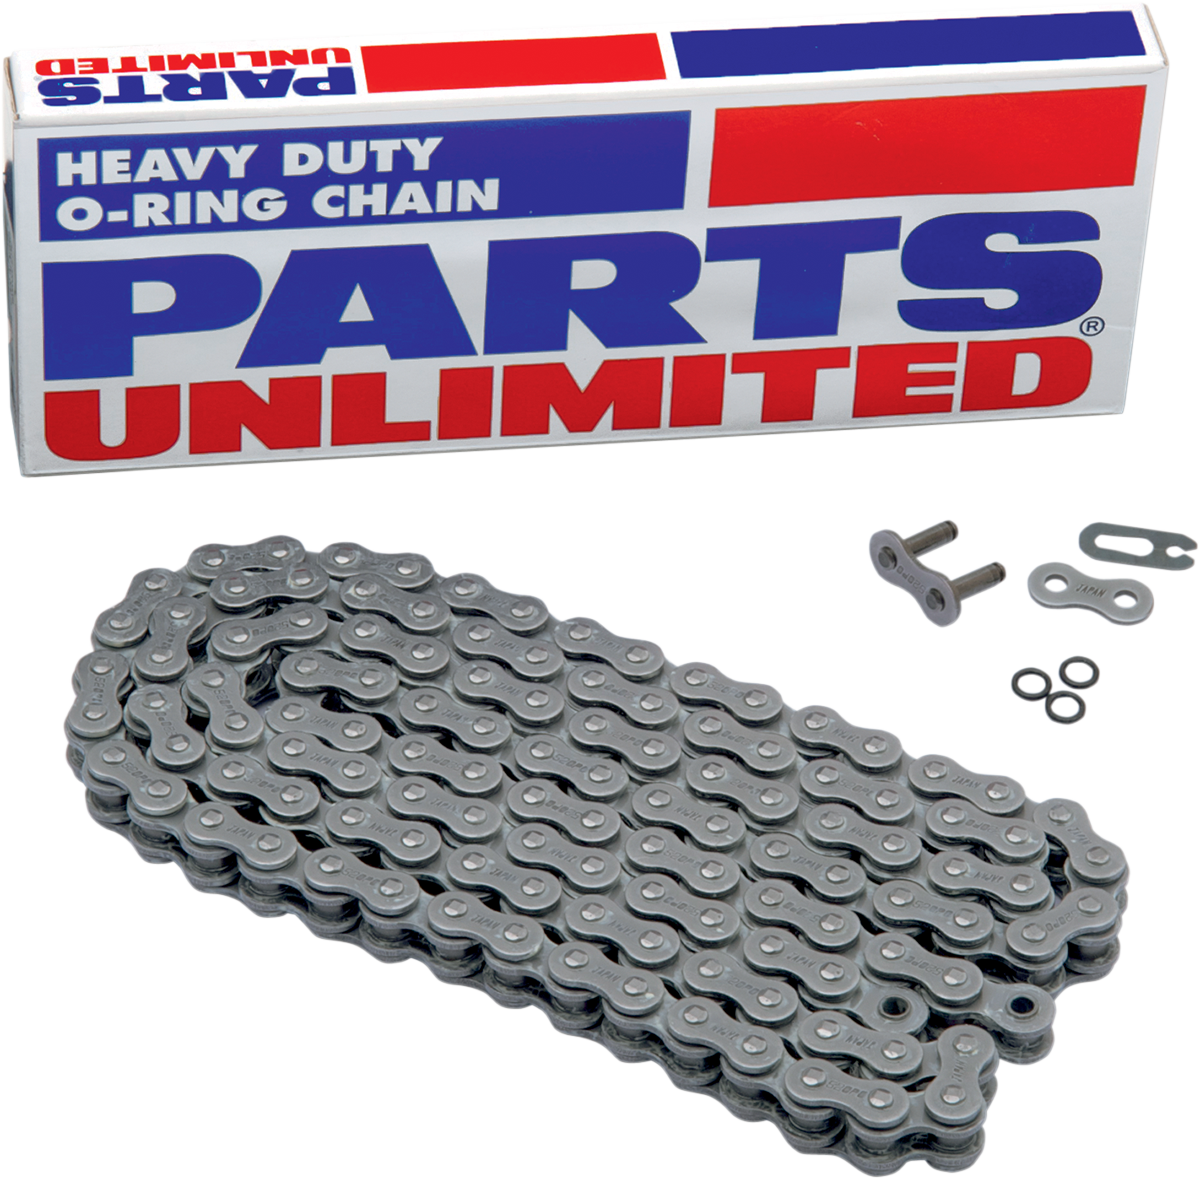 PARTS UNLIMITED-CHAIN MOTORCYCLE CHAIN CHAIN PU 520 O-RNG X 110L